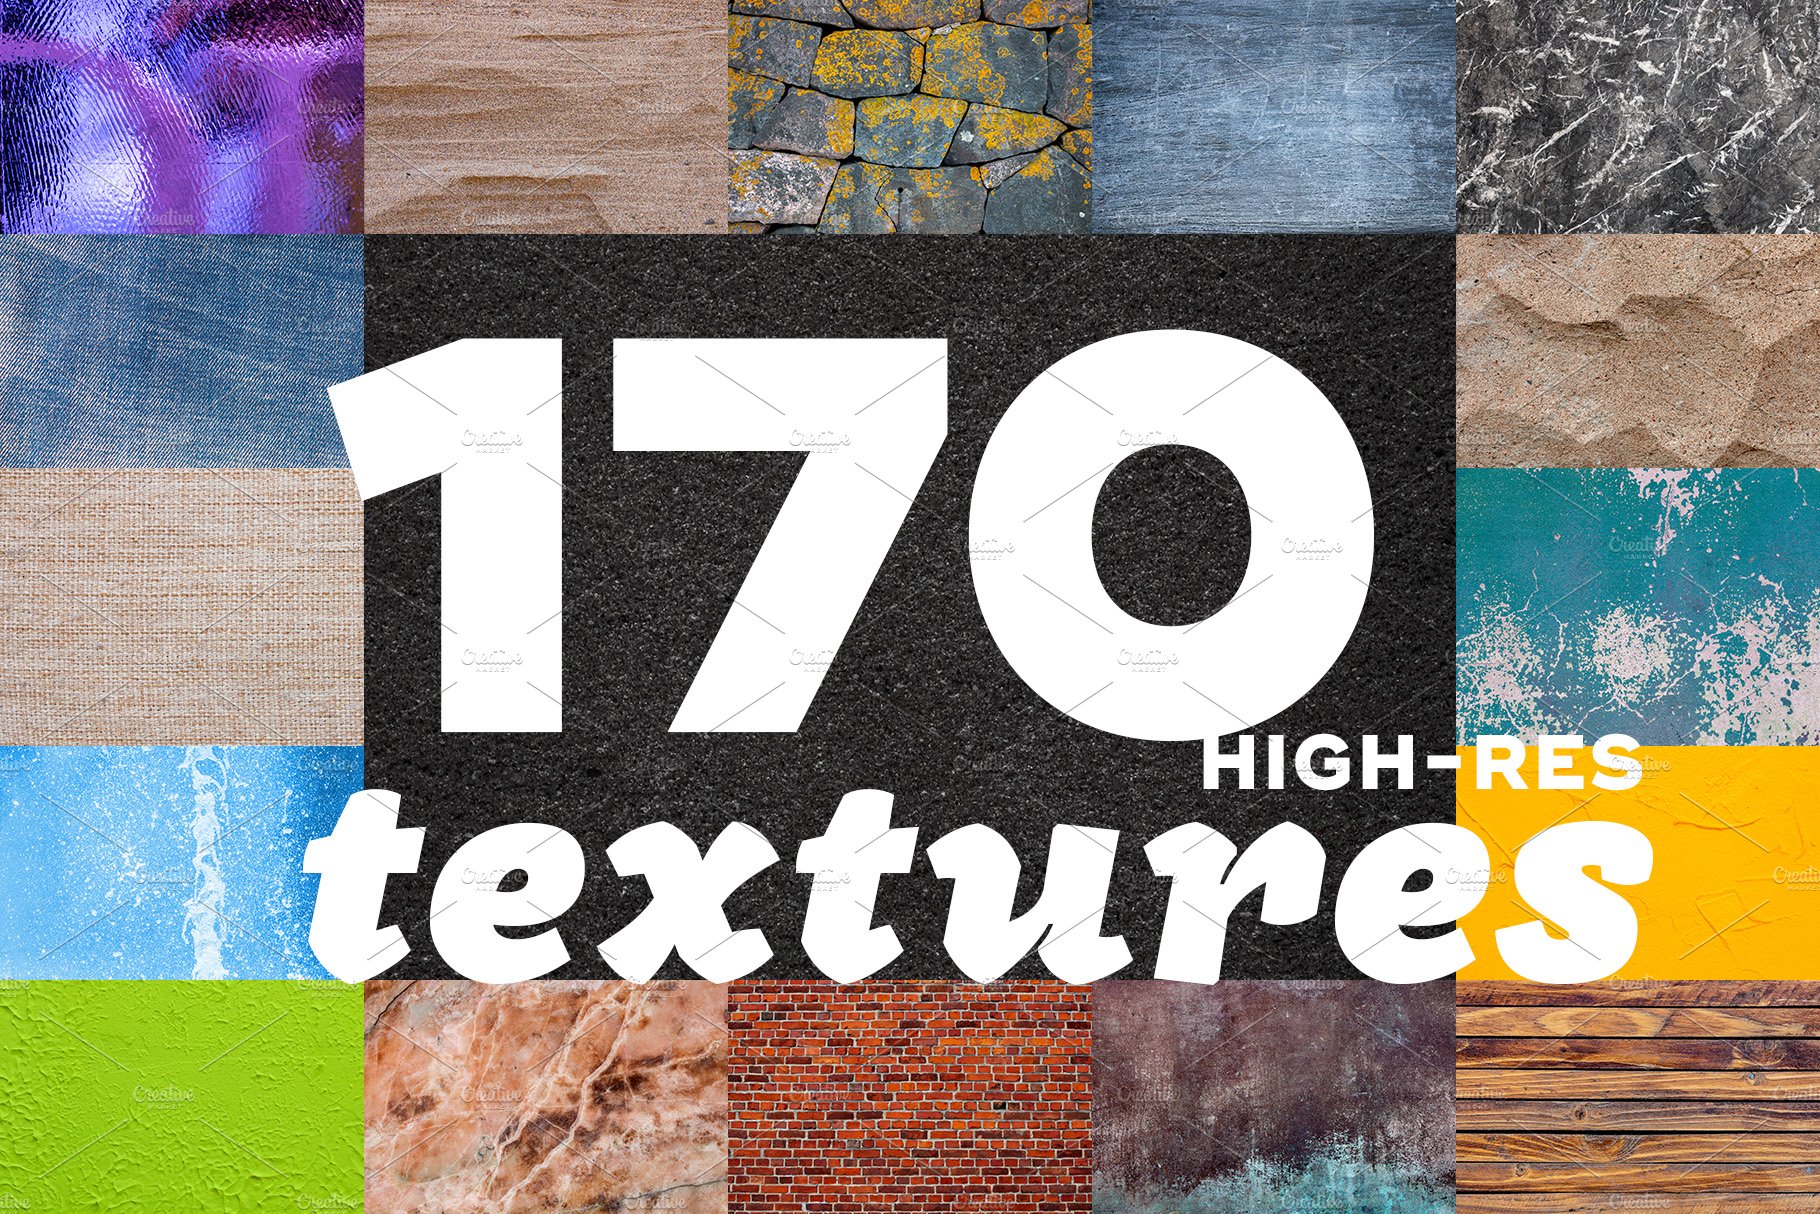 170 Textures Mega Pack cover image.